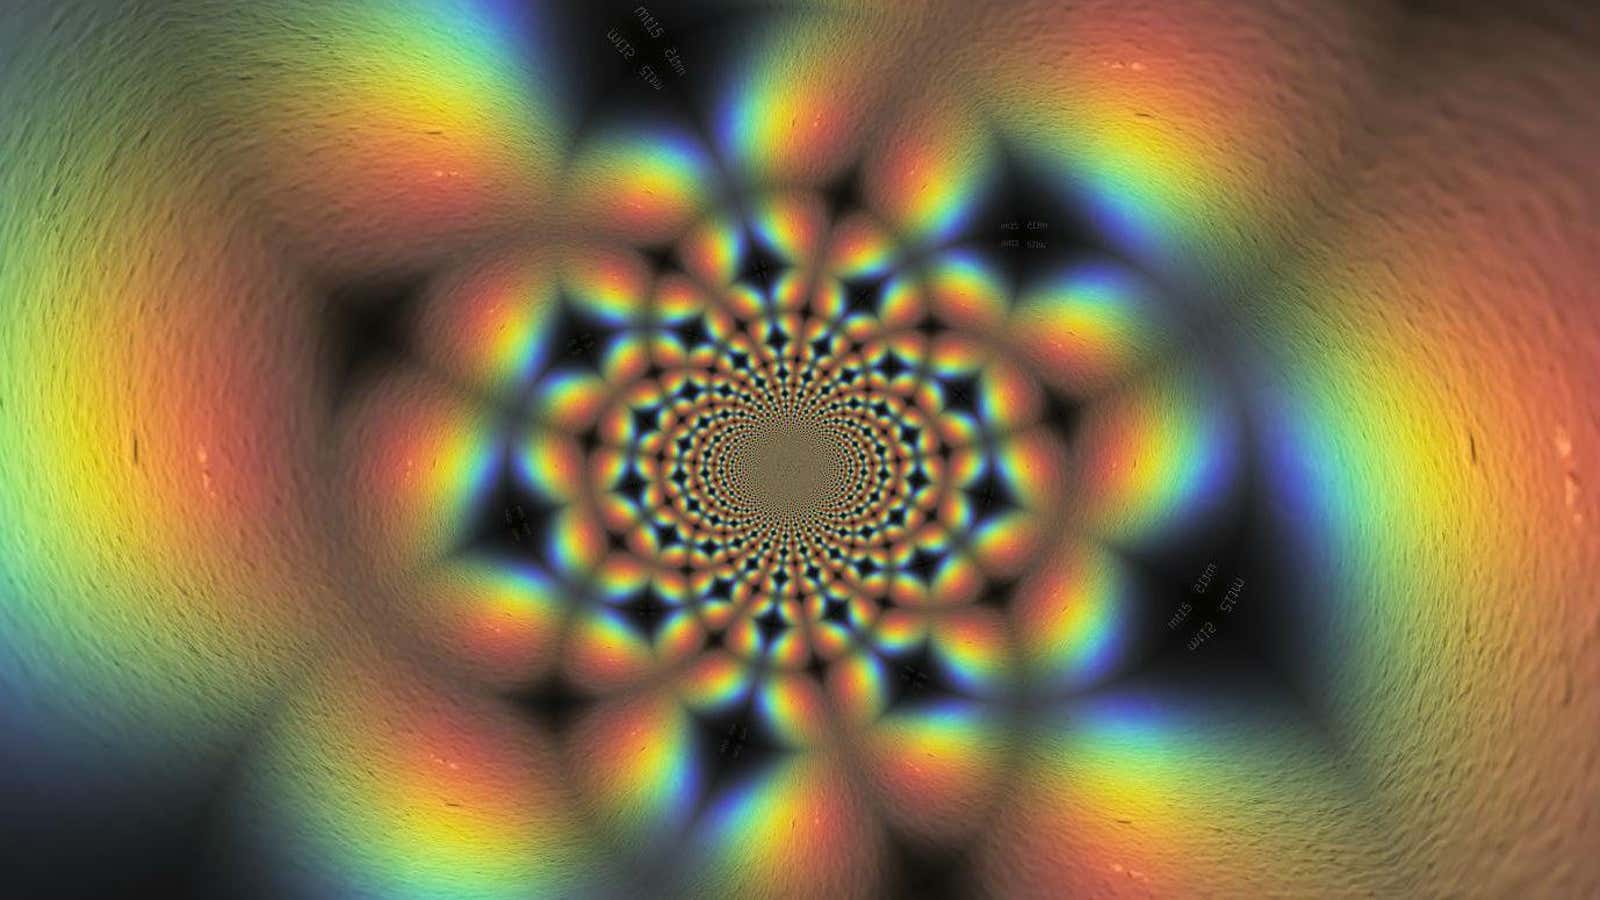 John Hopkins researchers are sending patients on psychedelic trips